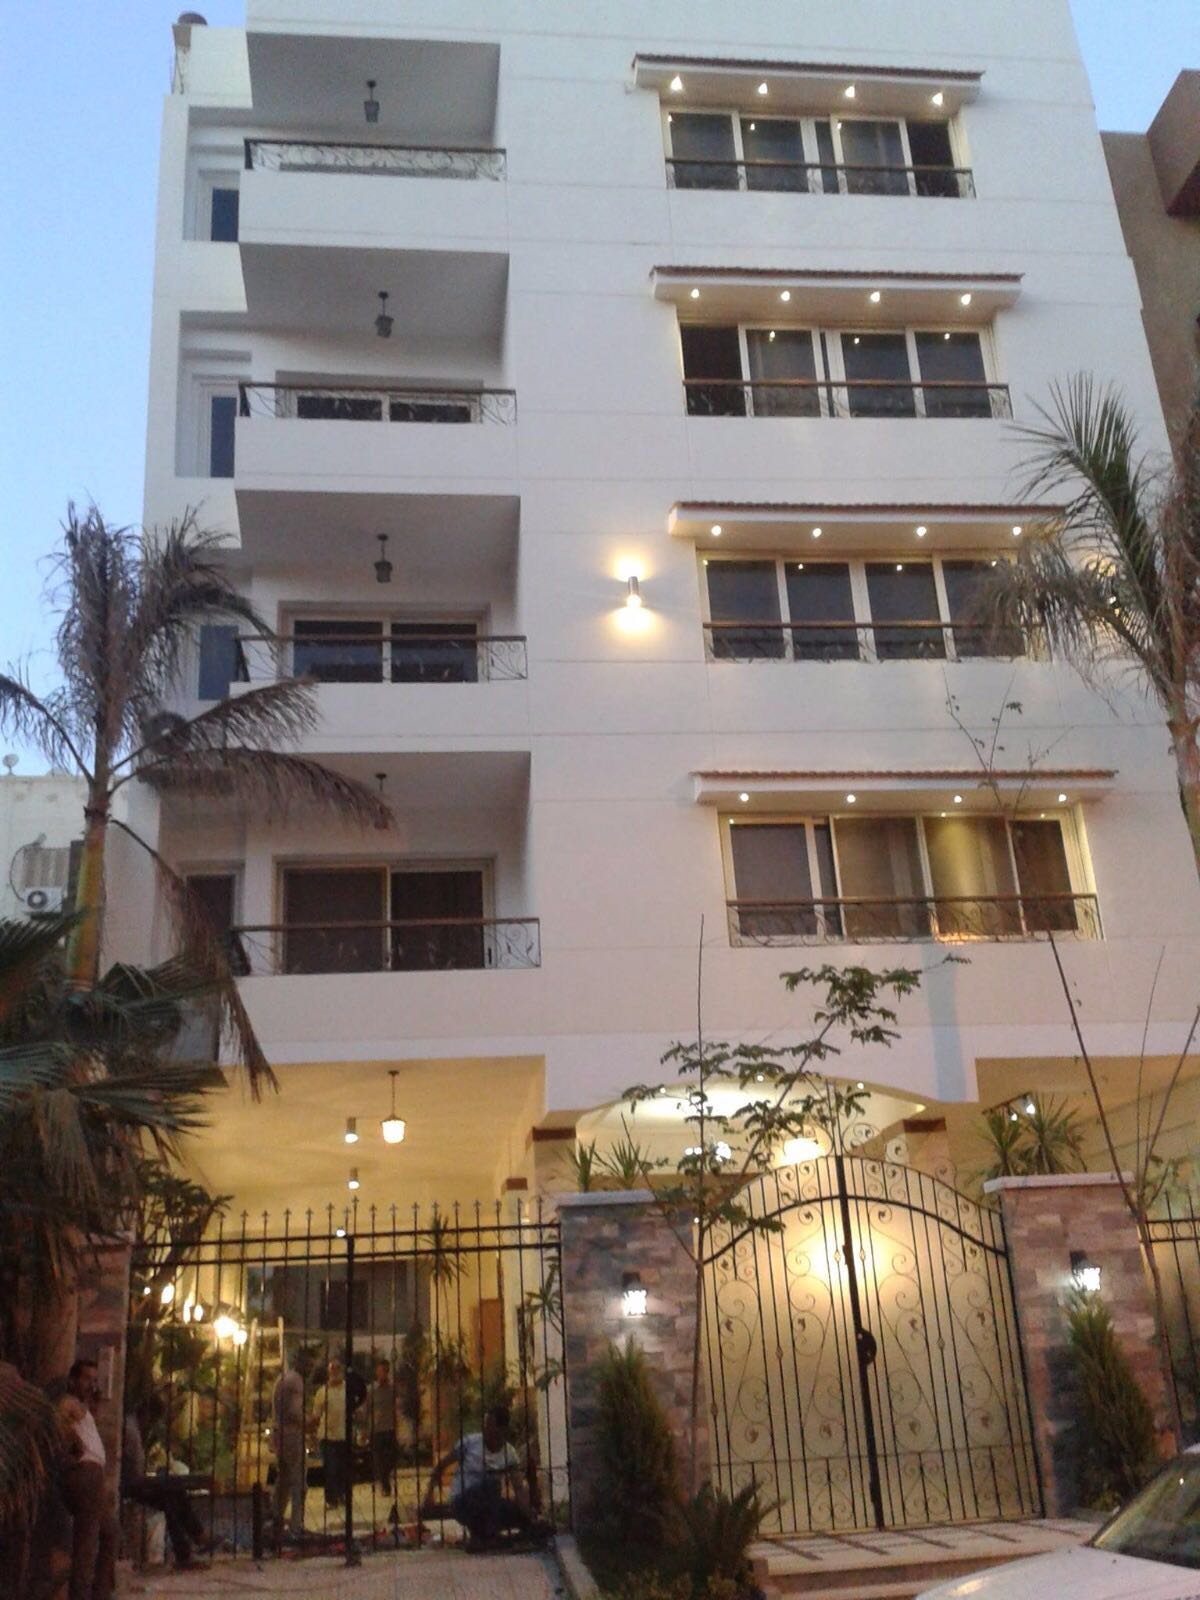 Building for Sale in 6 October, Giza